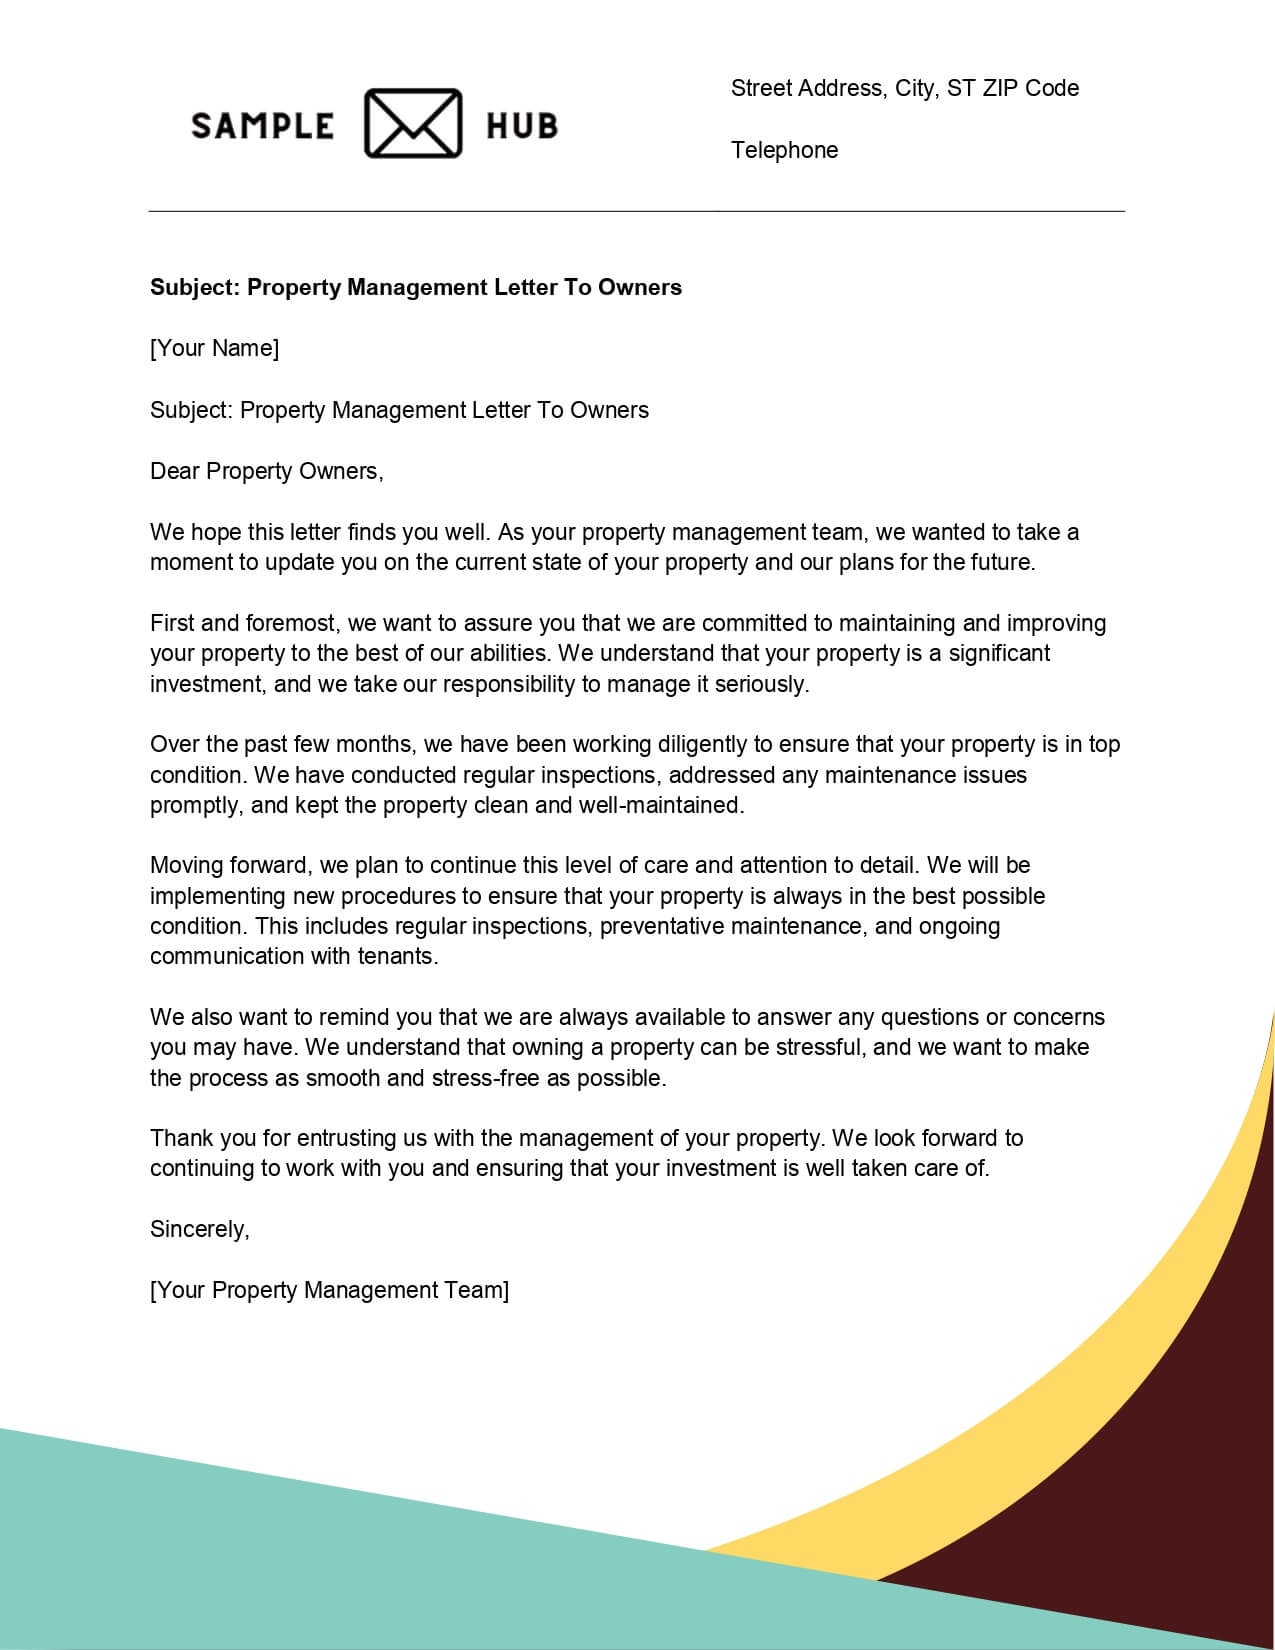 Property Management Letter To Owners